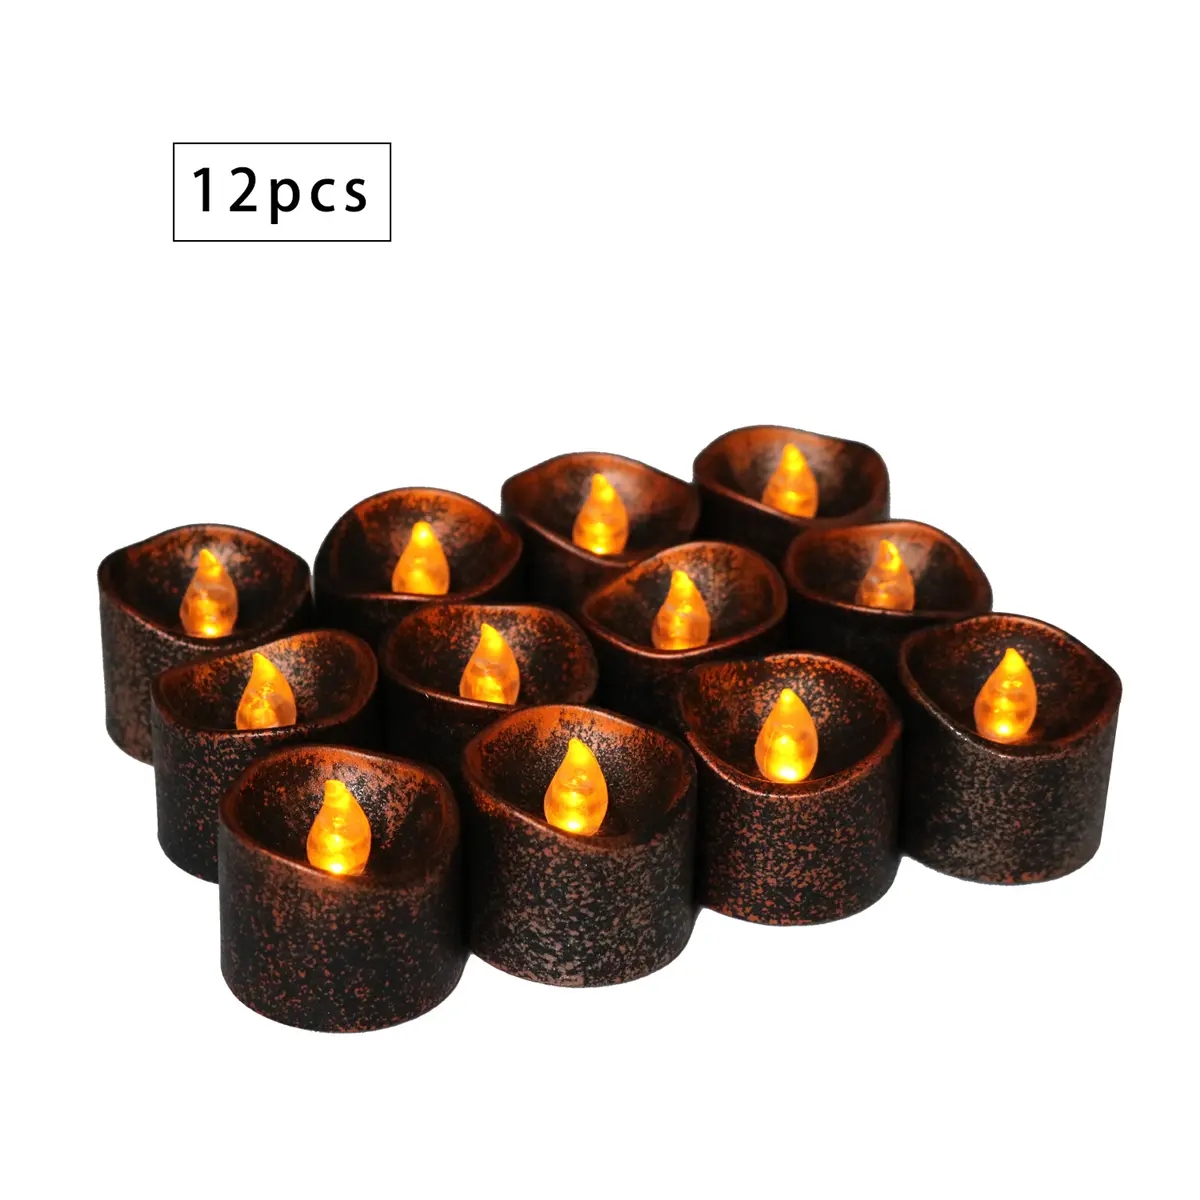 12PCS-Halloween-Battery-Operated-Party-Decoration-Electronic-Flickering-LED-Candle-Lamp-Yellow-1893460-2